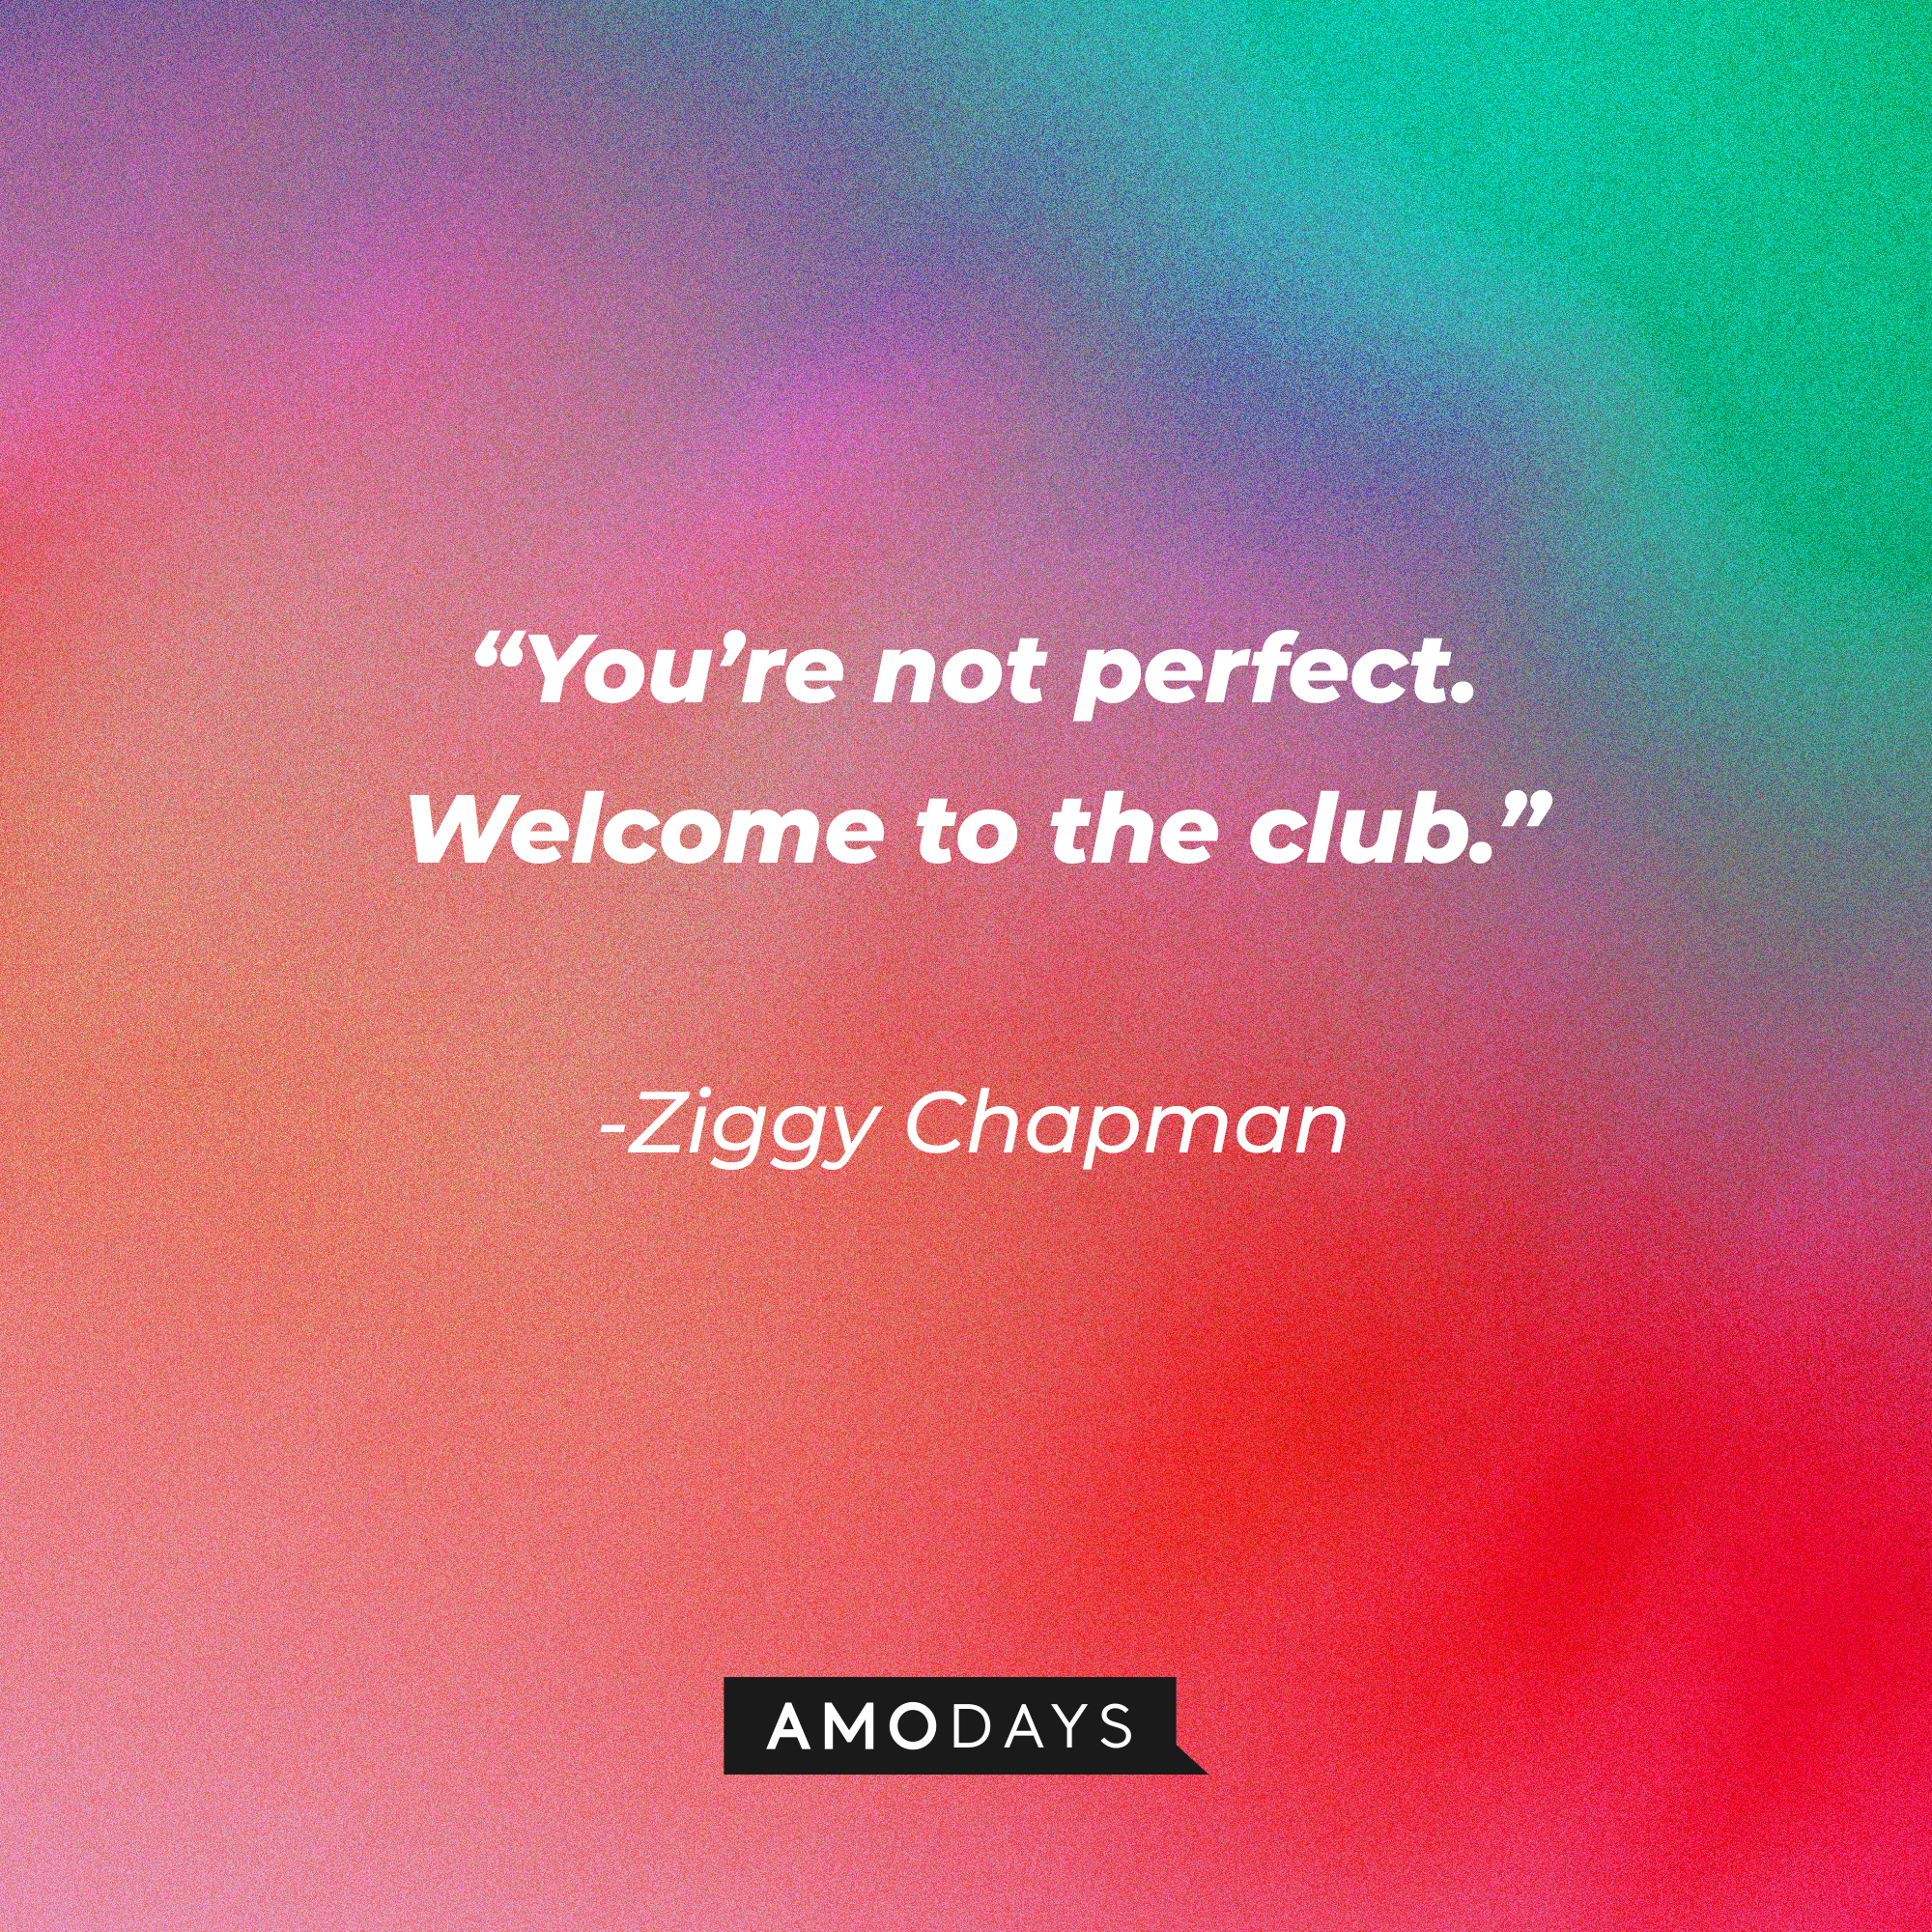 Ziggy Chapman’s quote: “You’re not perfect. Welcome to the club.” │Source: AmoDays